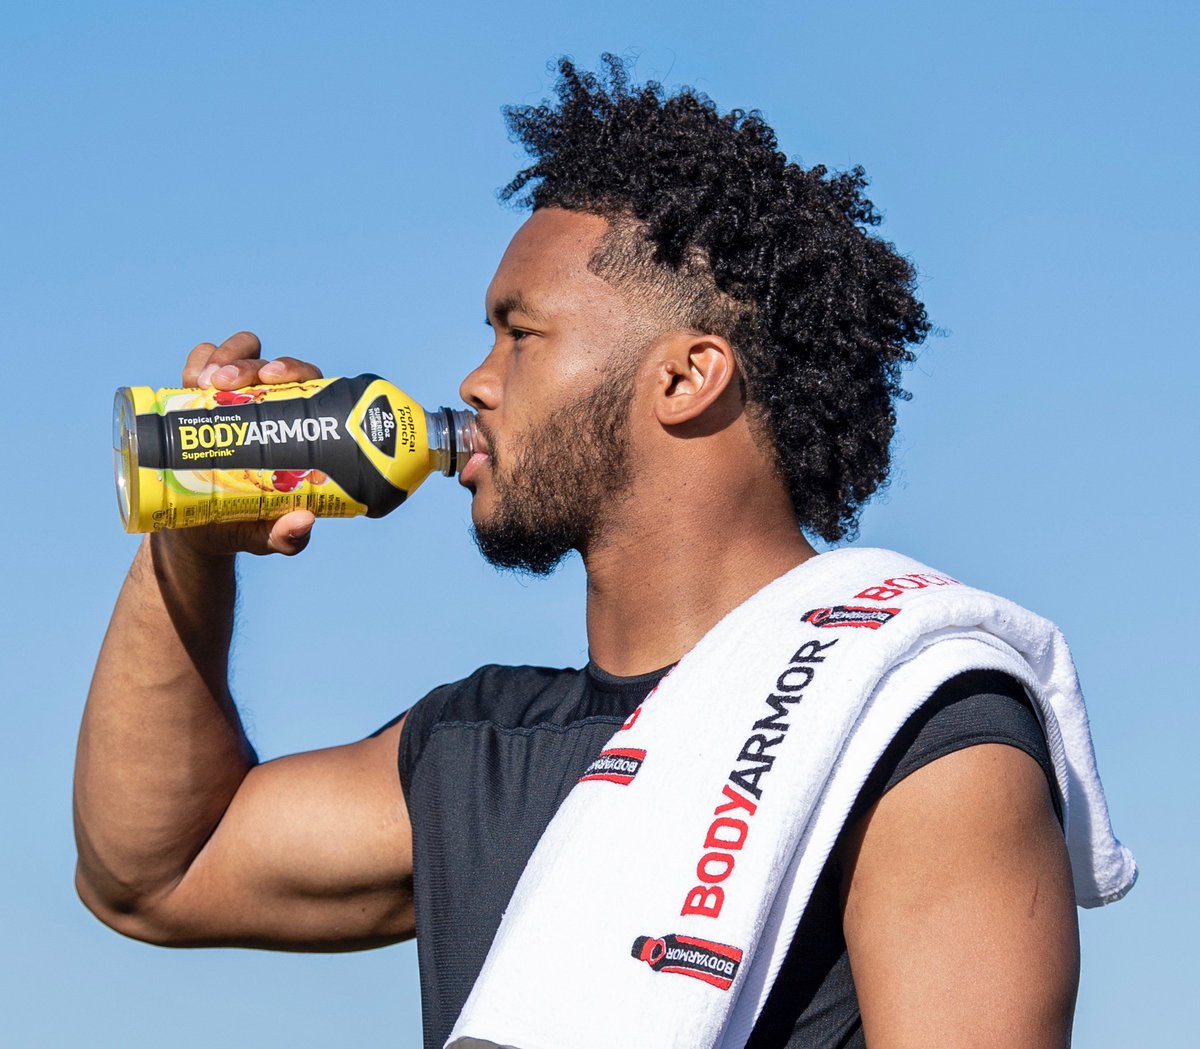 Officially upgrading my sports drink. Proud to be a part of the @DrinkBODYARMOR squad #TeamBODYARMOR